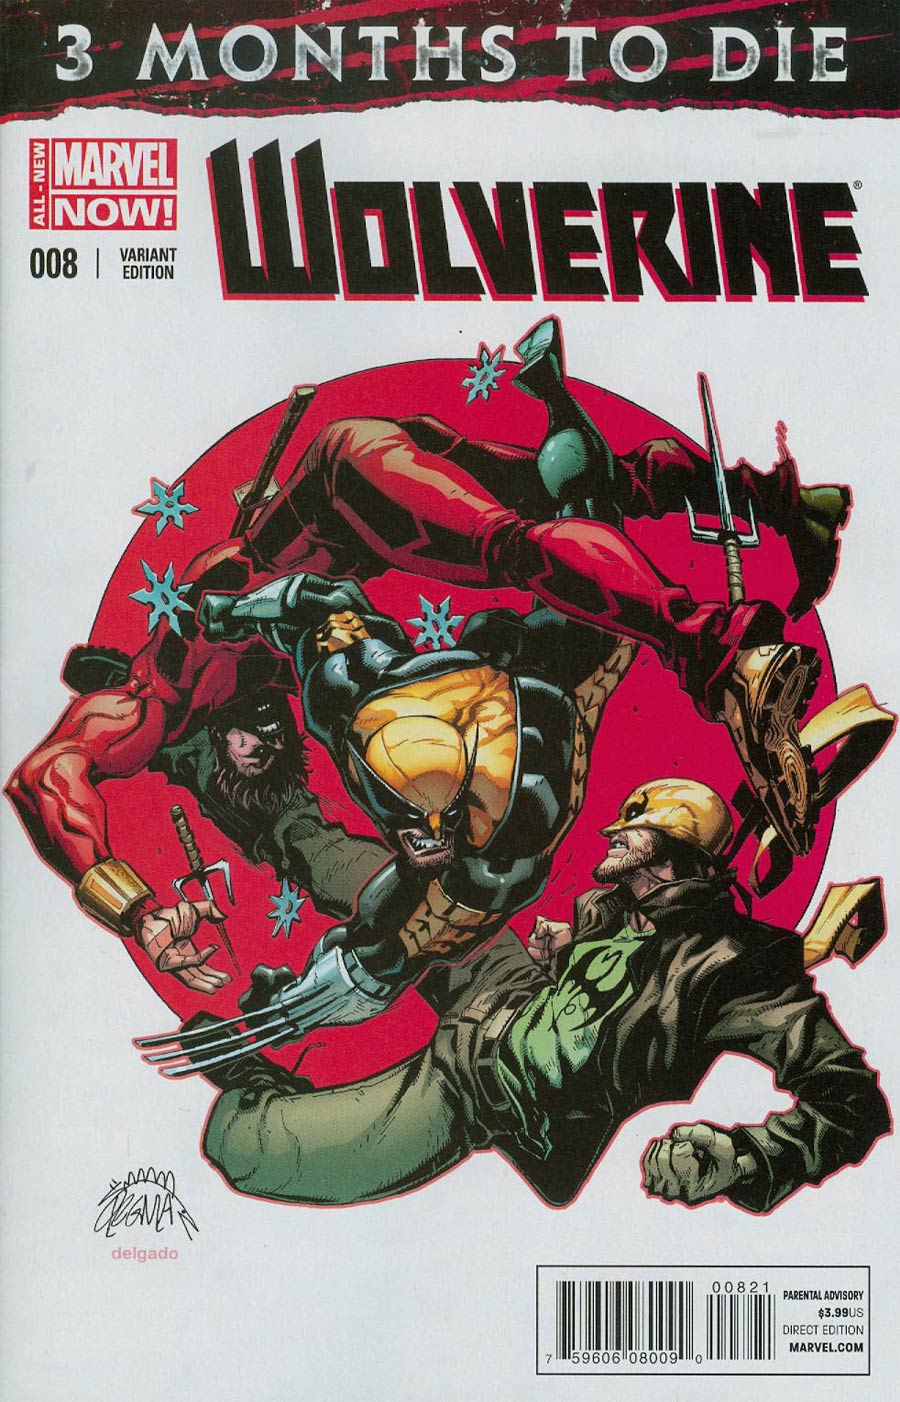 Wolverine Vol 6 #8 Cover B Incentive Ryan Stegman Variant Cover (3 Months To Die Part 1)